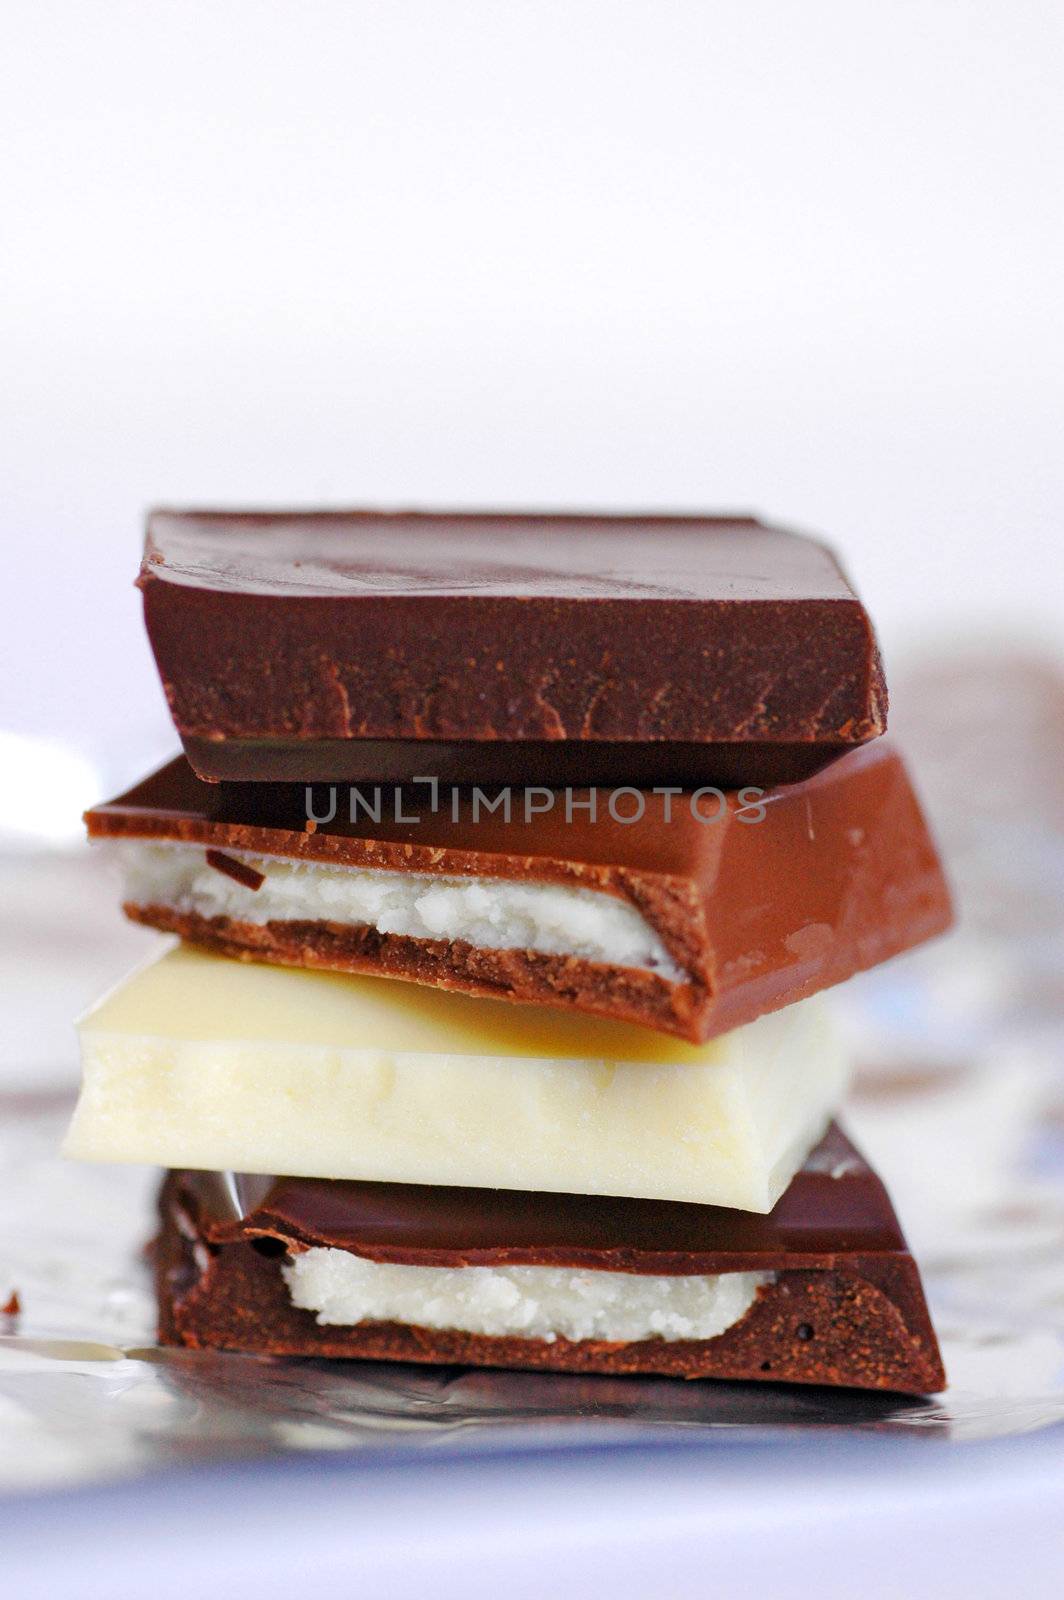 Chocolate on silver foil by Bestpictures